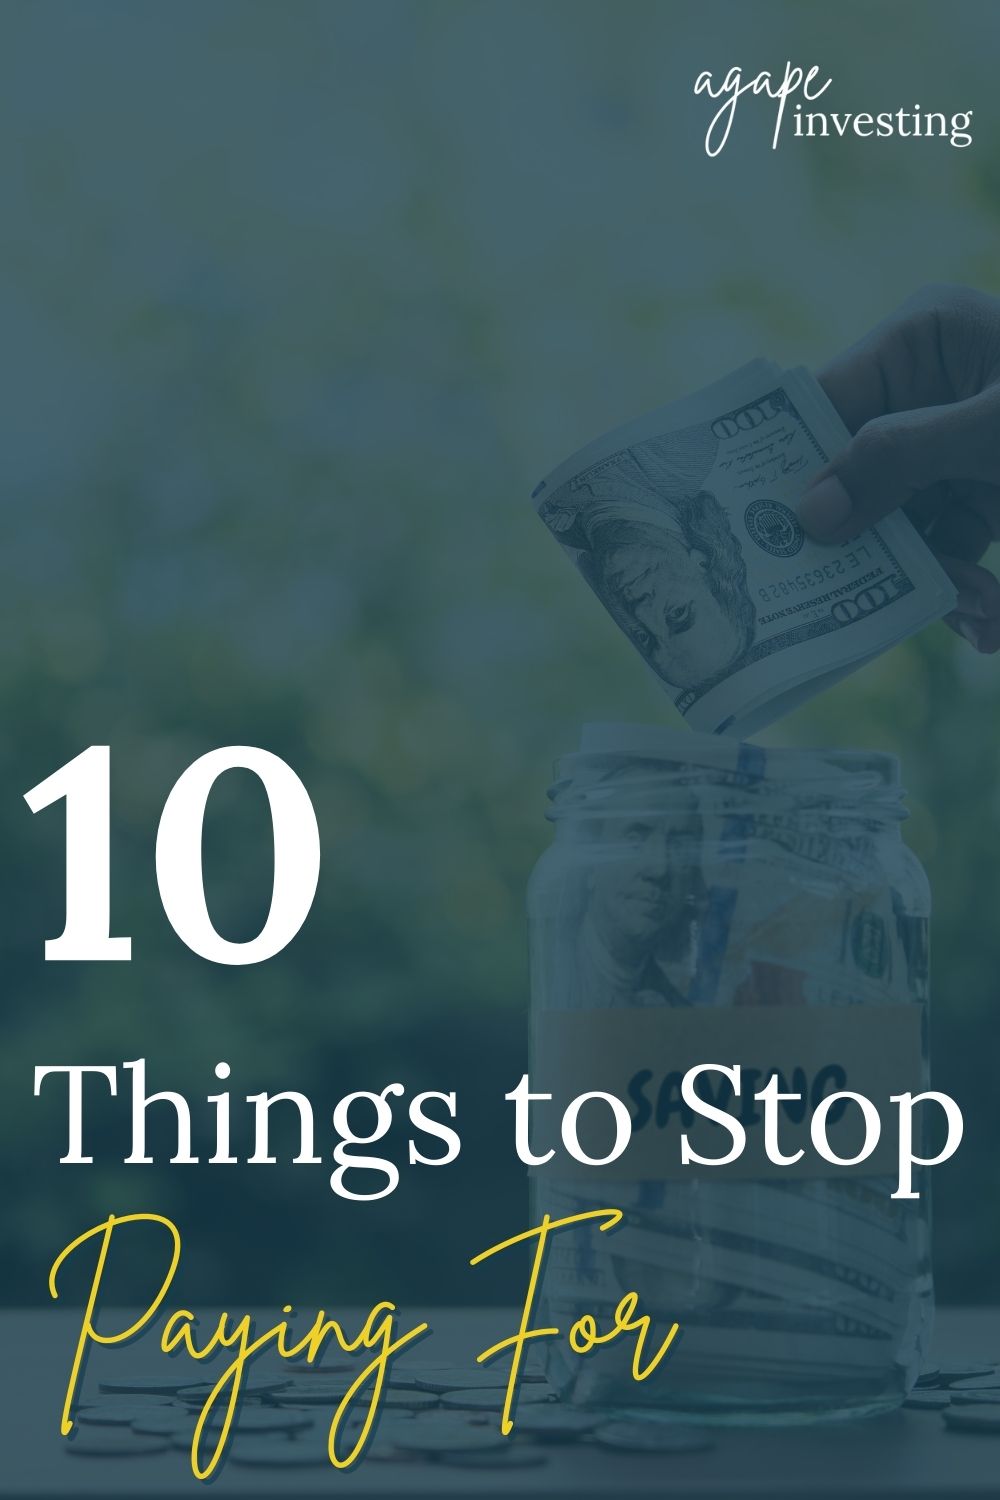 Many times, after working 1:1 with a client, I have found that they are paying for things that are honestly just not necessary. So I want to share with you 10 things that you need to stop paying for based on things I have seen my clients pay for